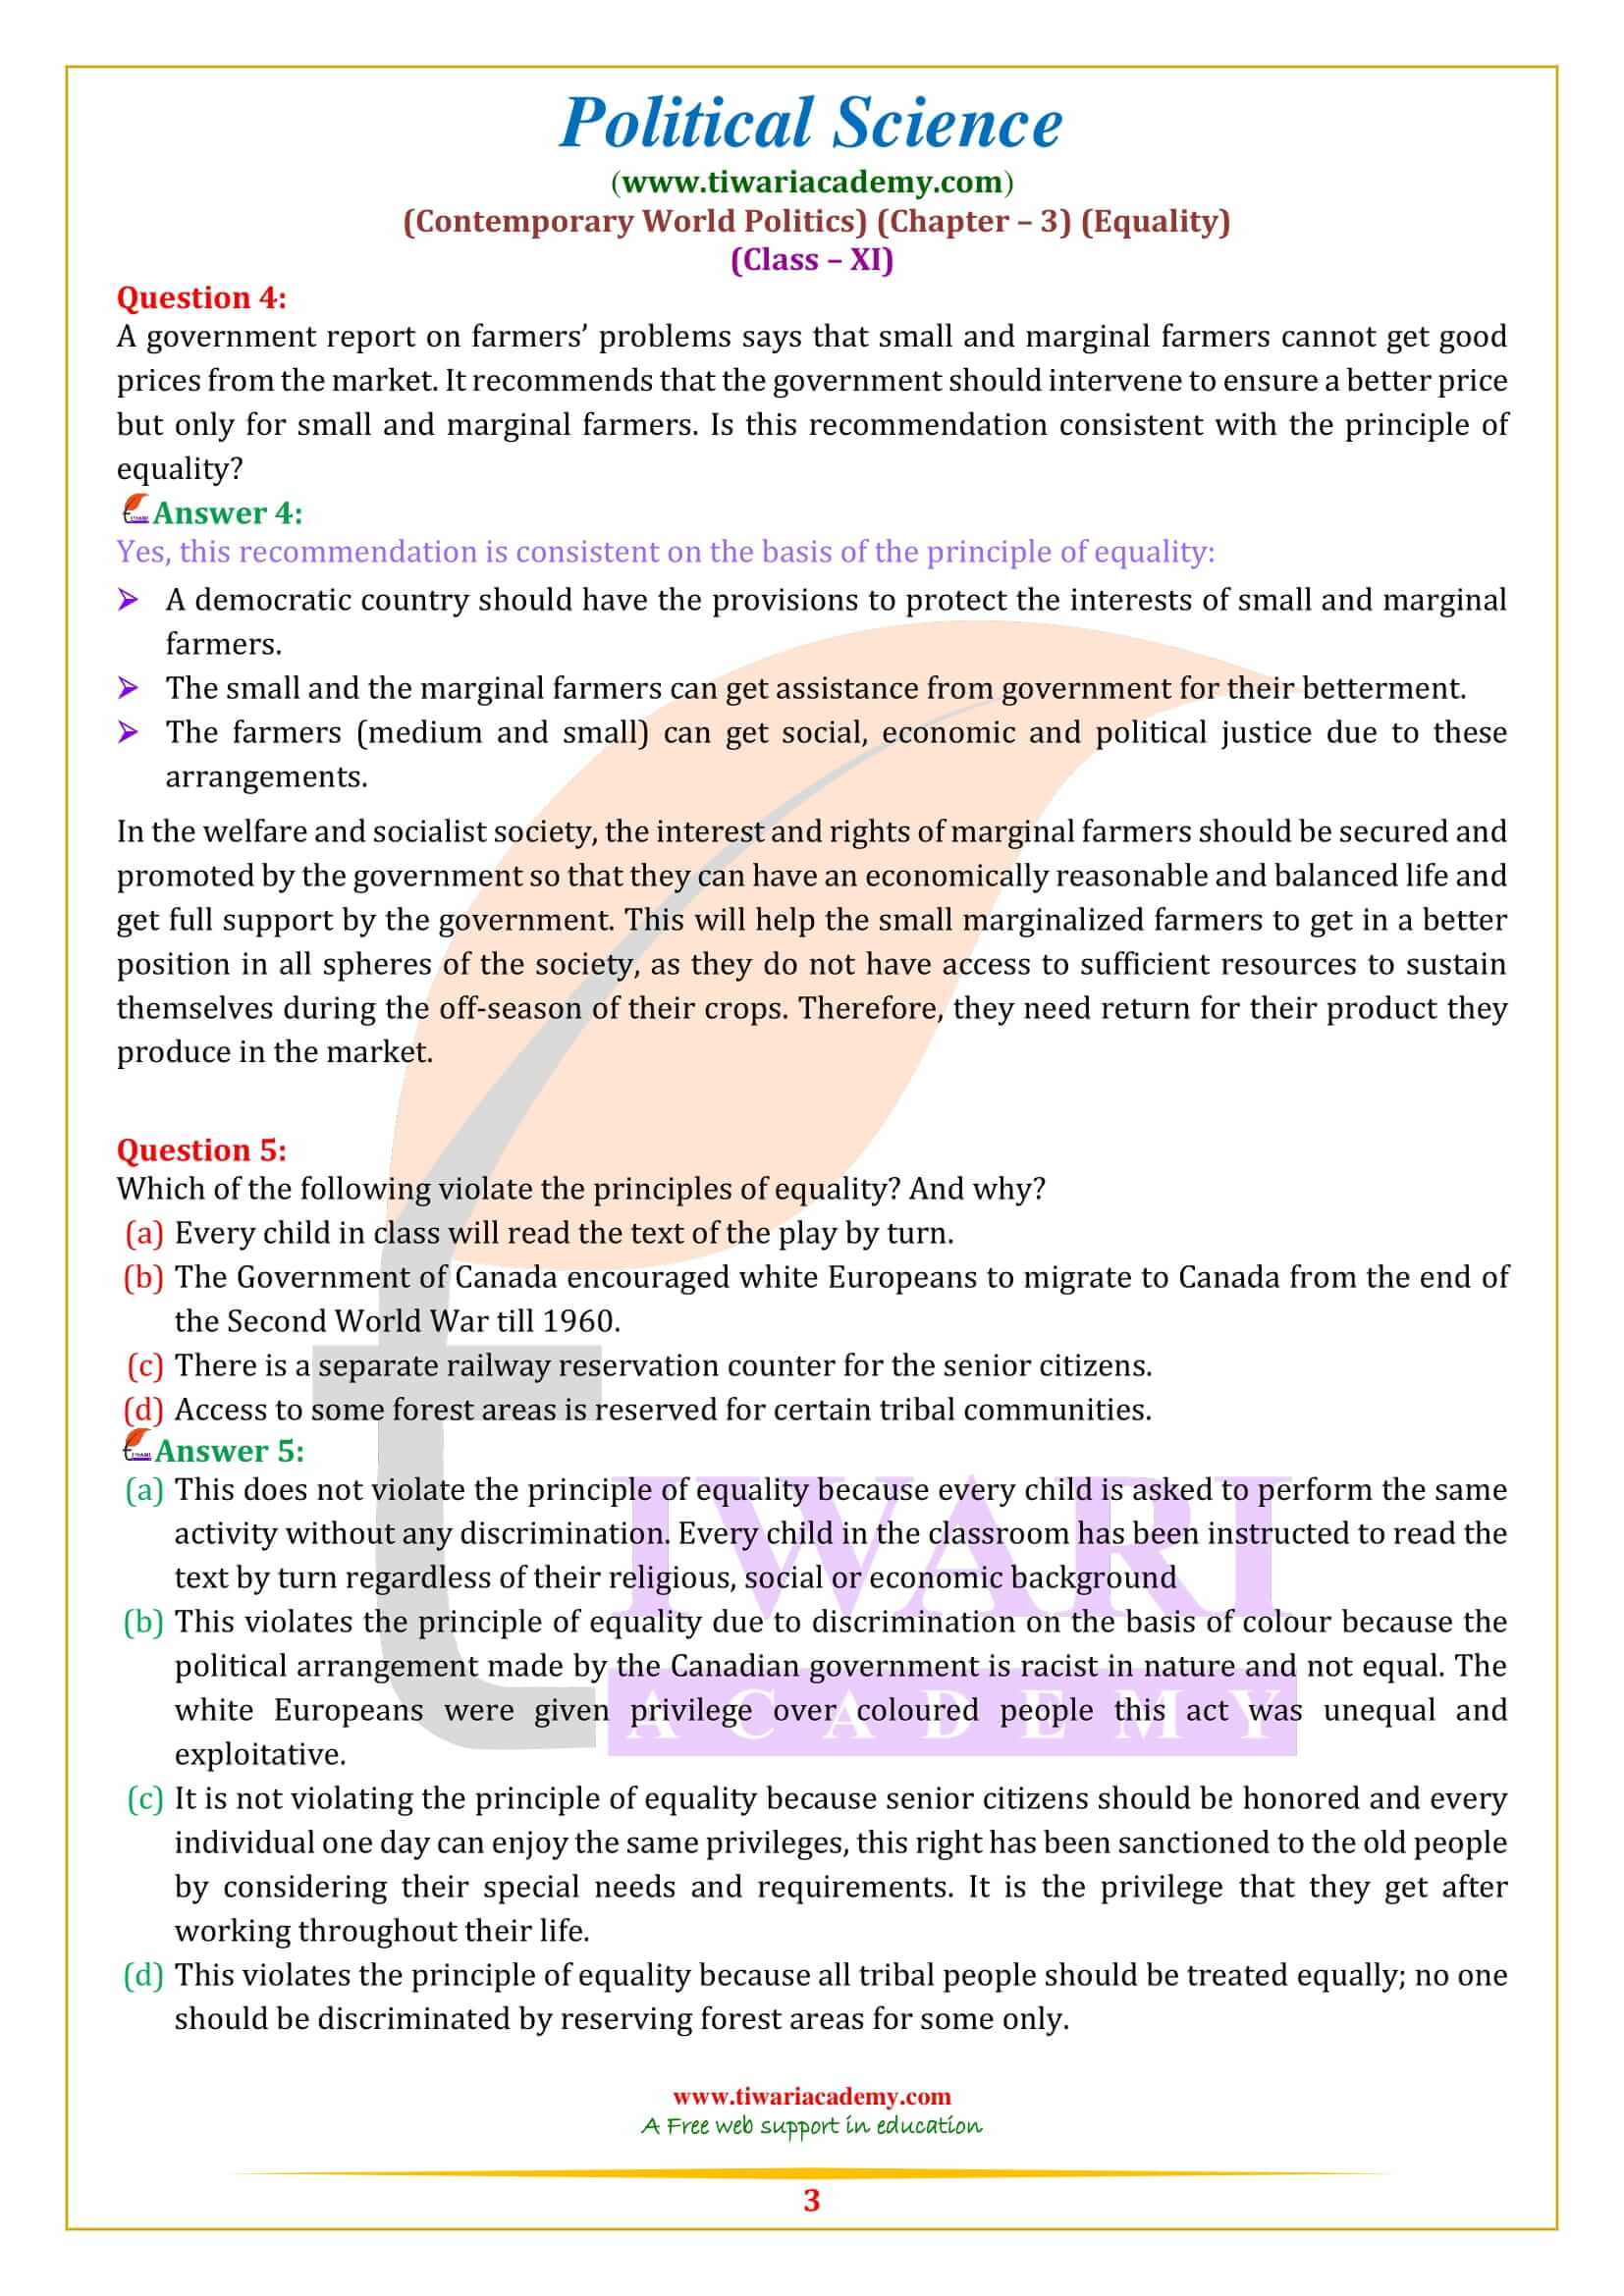 NCERT Solutions for Class 11 Political Science Chapter 3 in English Medium